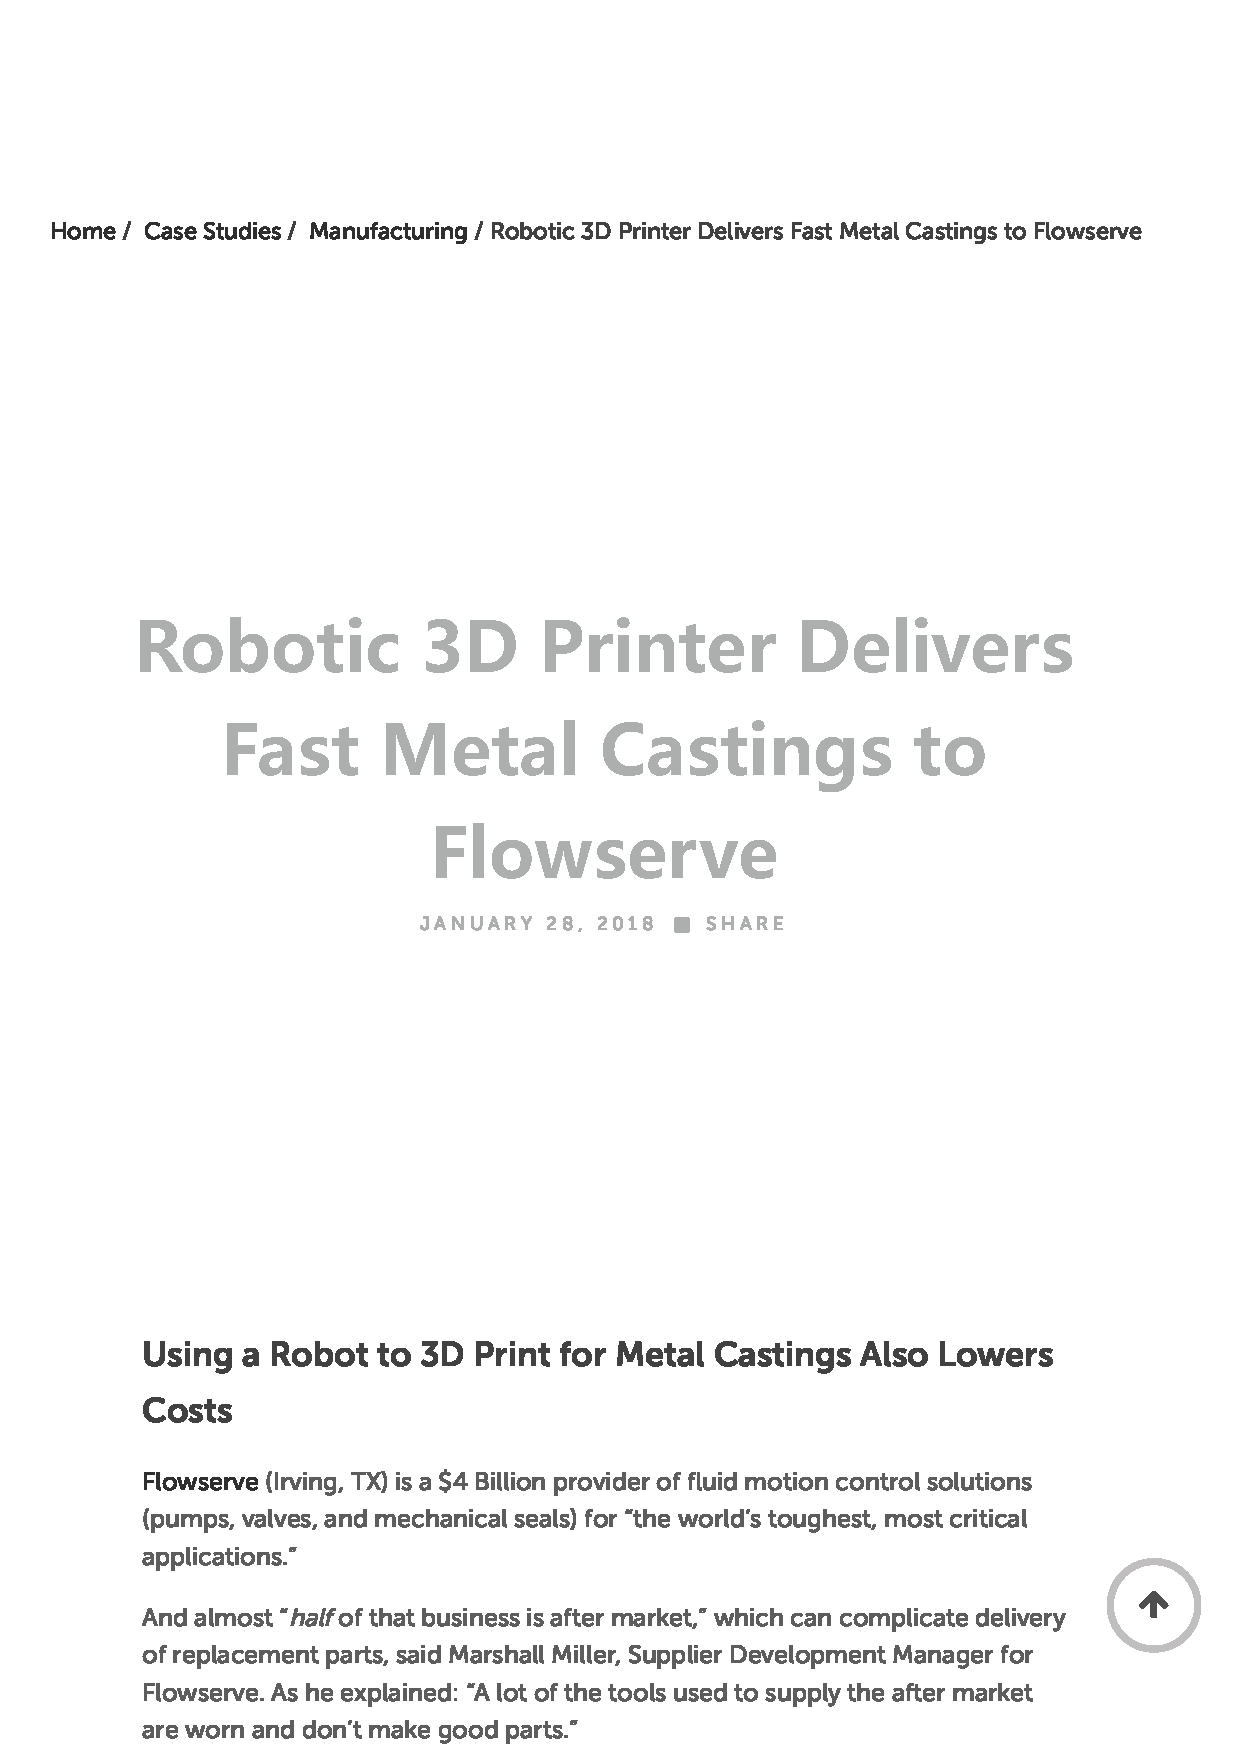 How Robotic 3D Printing is Helping Flowserve _ EnvisionTEC